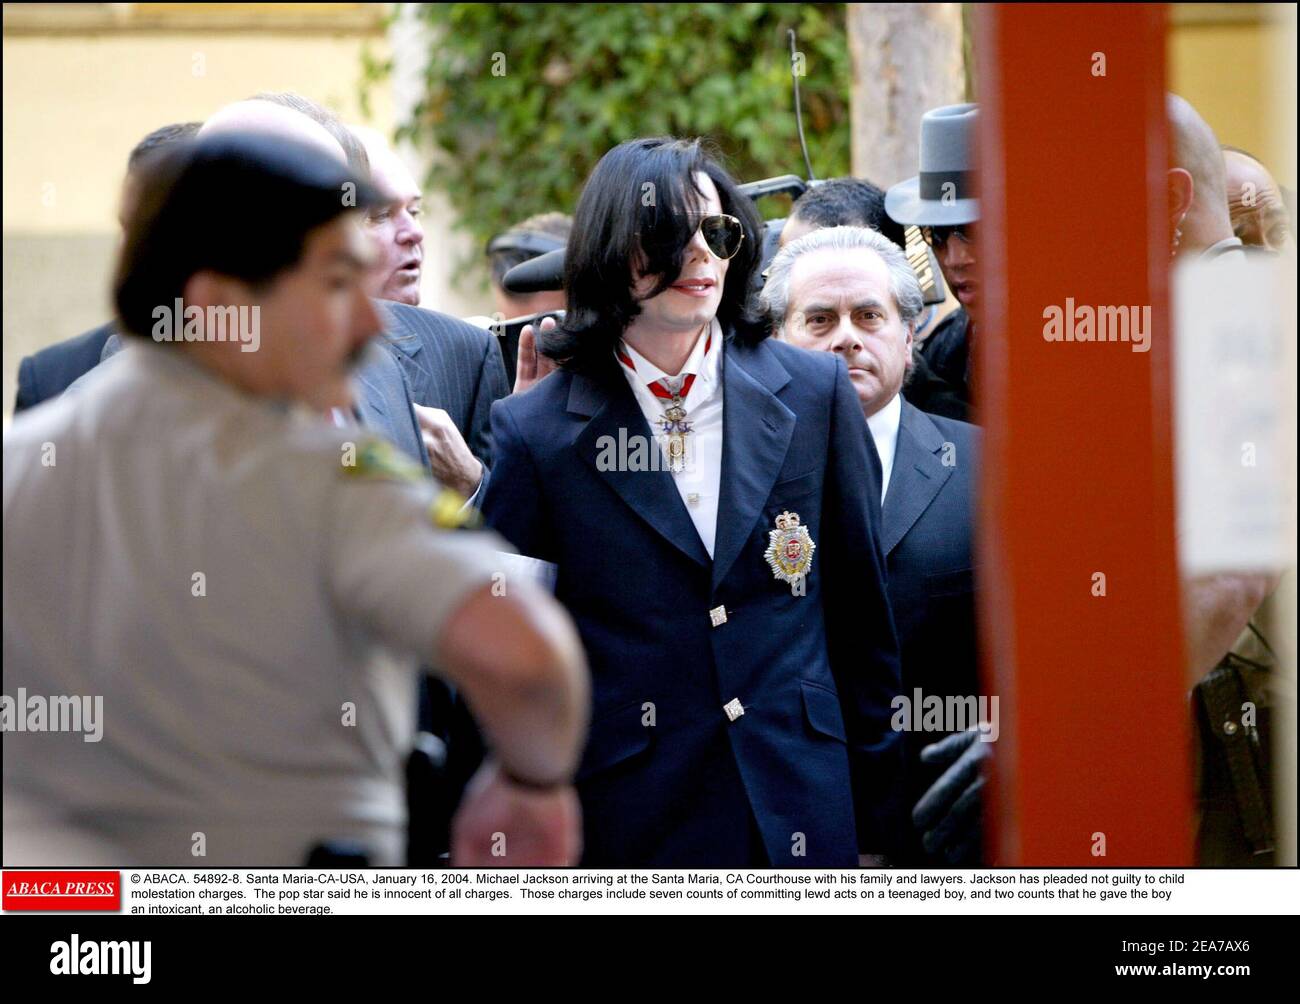 © ABACA. 54892-8. Santa Maria-CA-USA, January 16, 2004. Michael Jackson arriving at the Santa Maria, CA Courthouse with his family and lawyers. Jackson has pleaded not guilty to child molestation charges. The pop star said he is innocent of all charges. Those charges include seven counts of committing lewd acts on a teenaged boy, and two counts that he gave the boy an intoxicant, an alcoholic beverage. Stock Photo